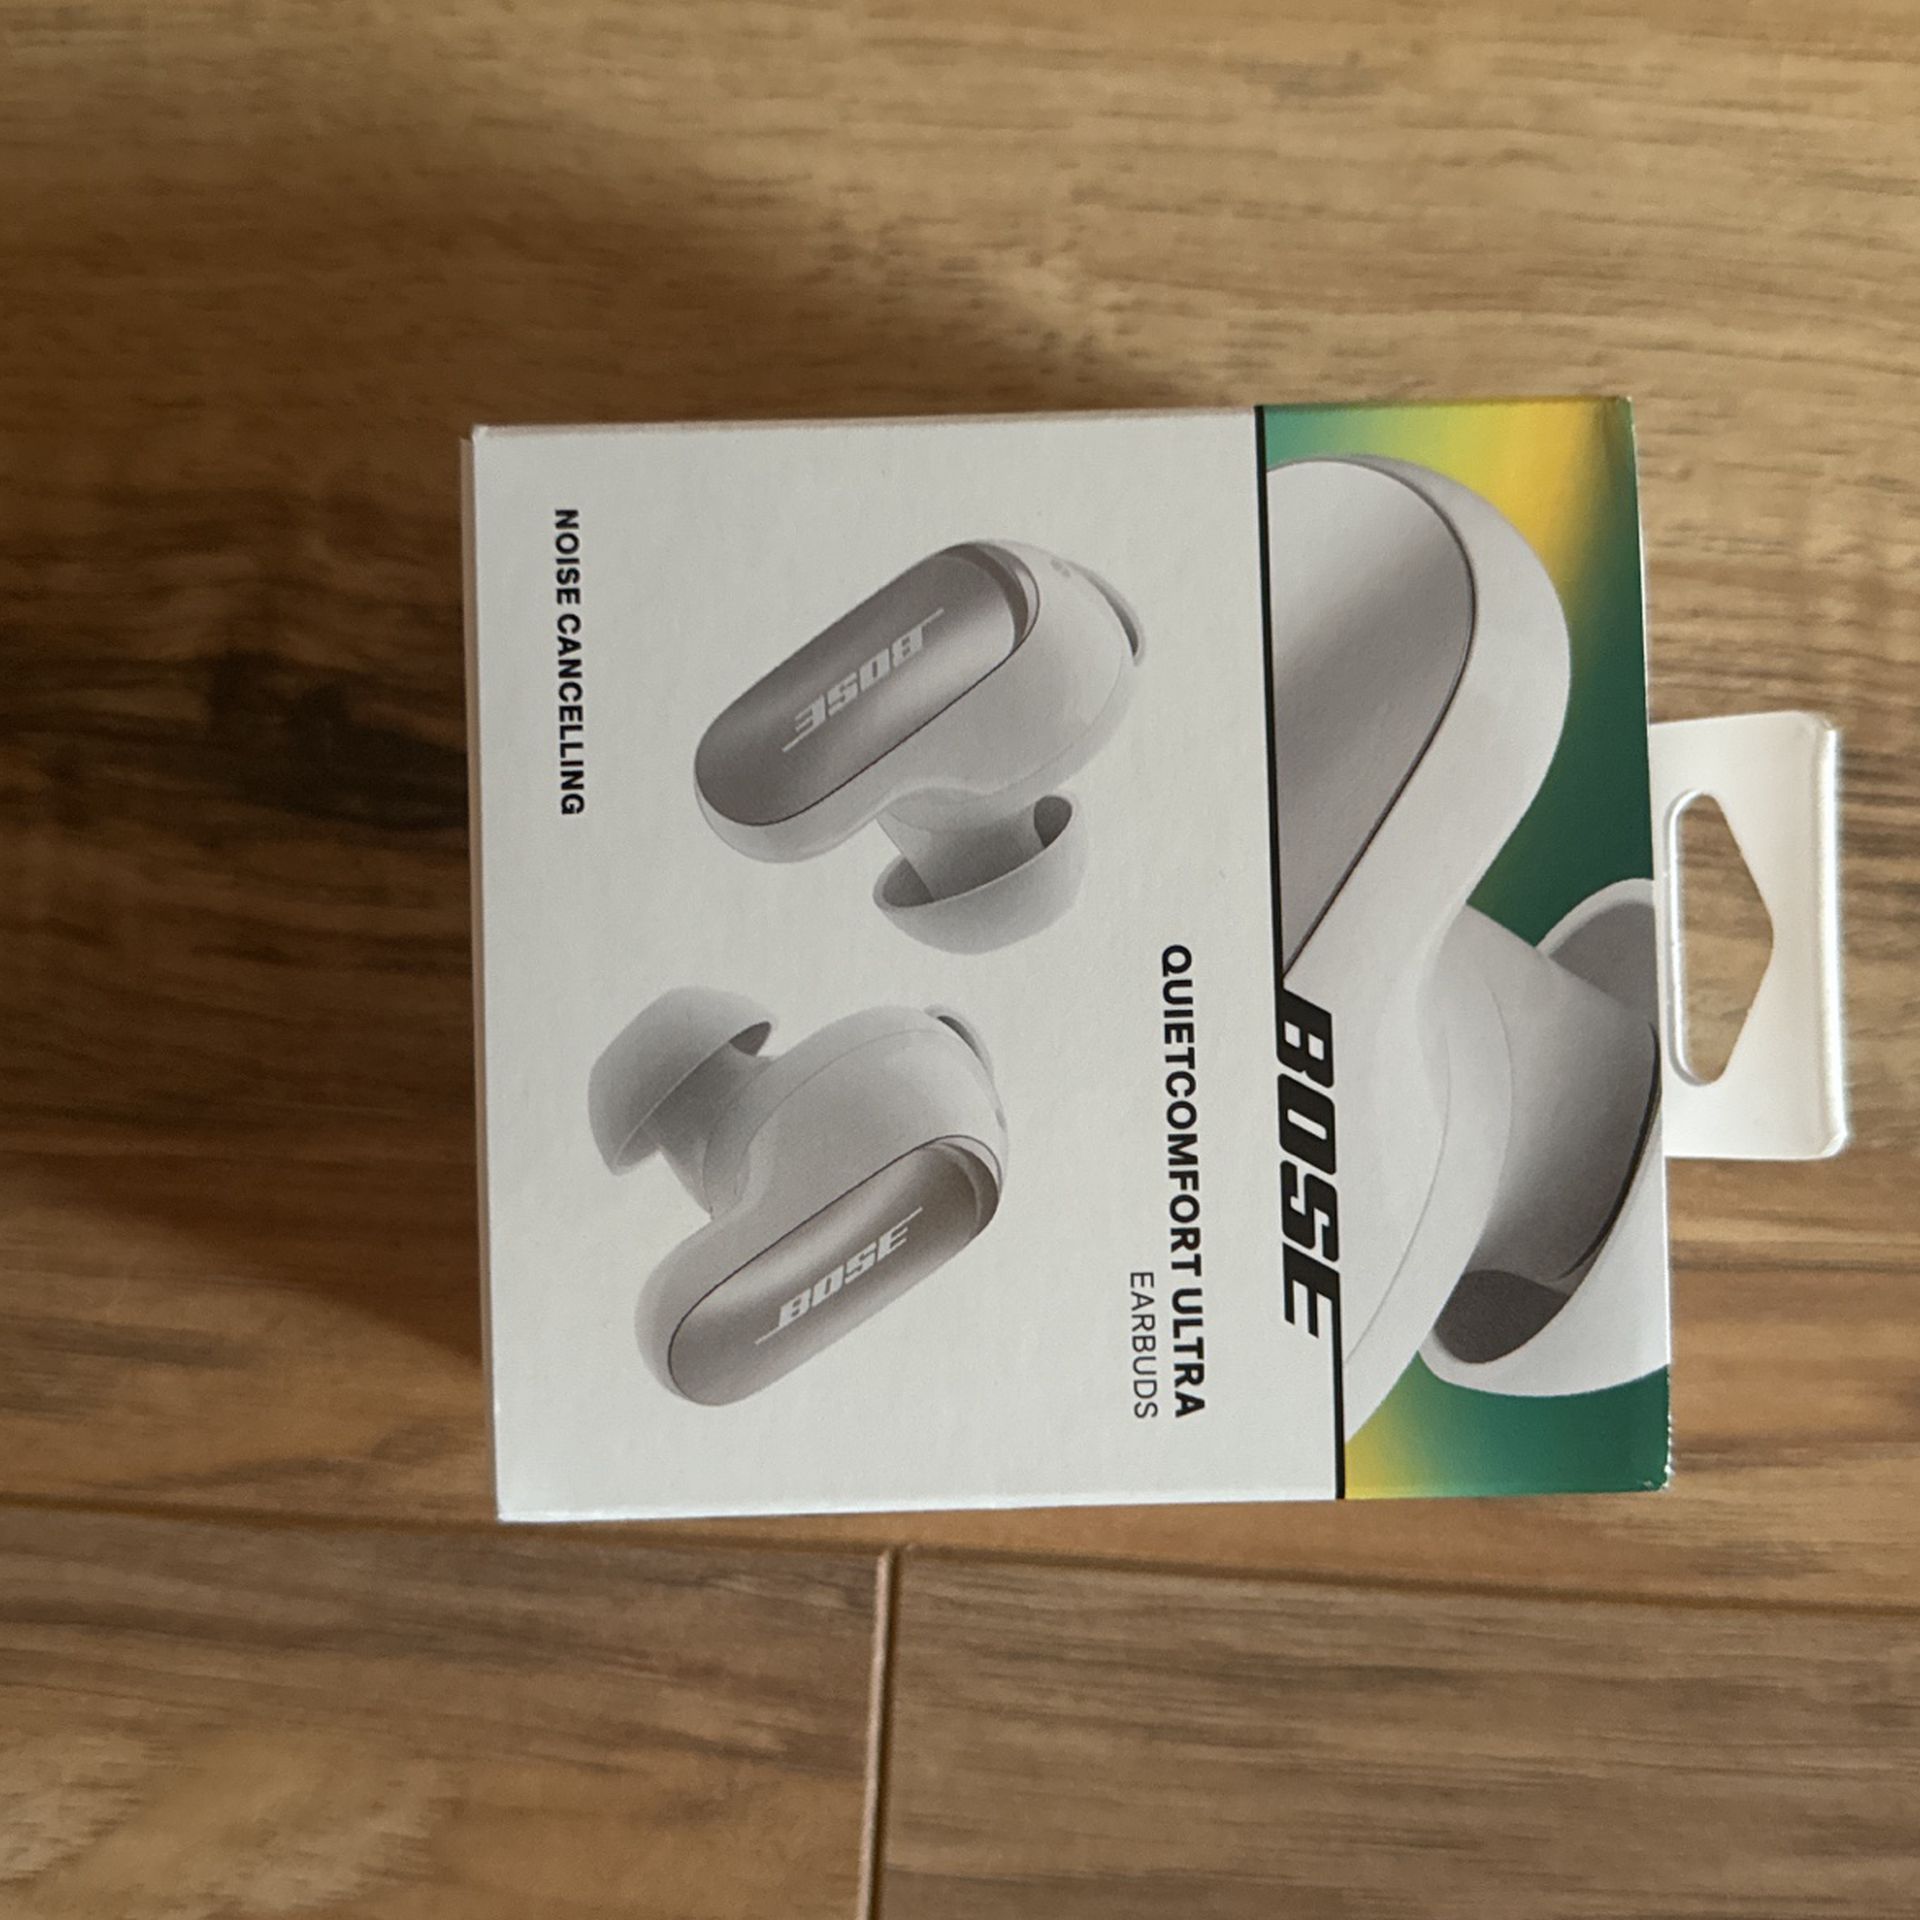 Bose Quietcomfort Ultra Earbuds - Noise Cancelling - Sealed Never Opened 